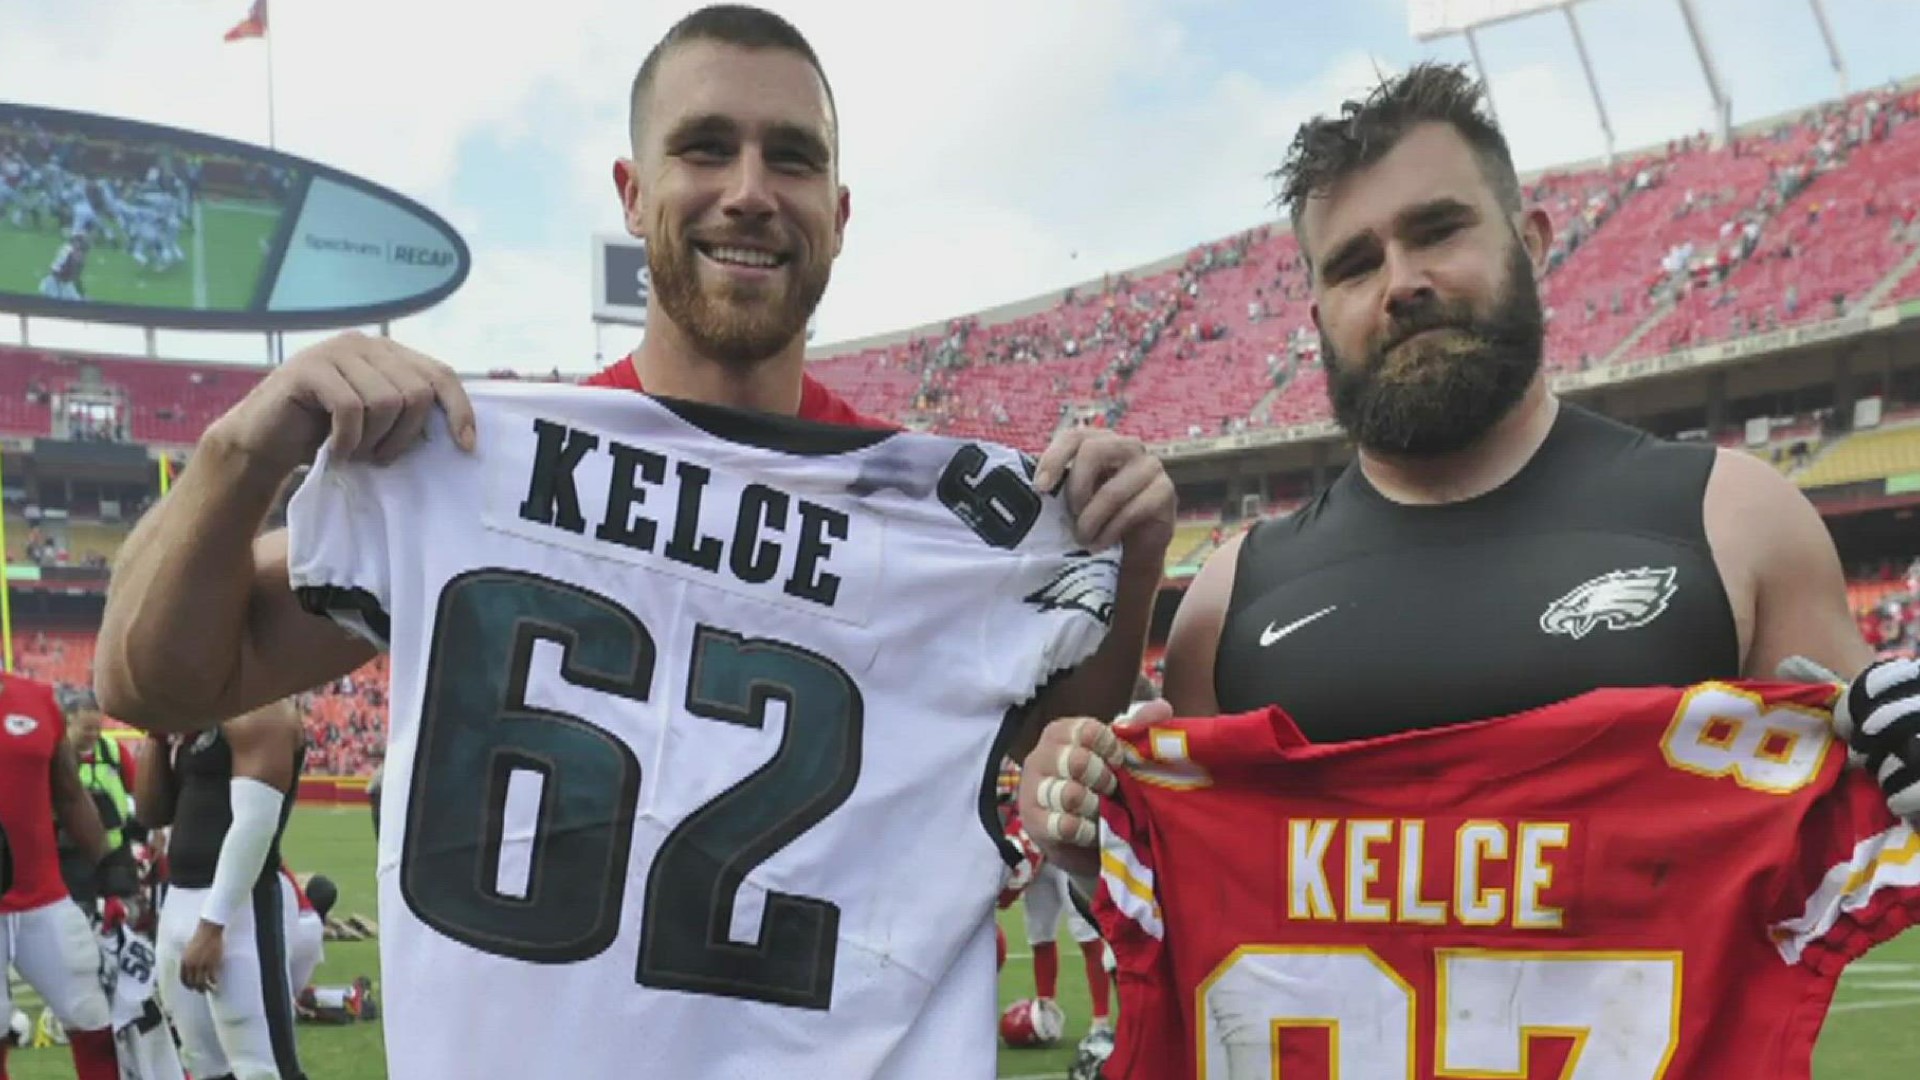 This weekend, Cleveland Heights brothers Travis and Jason Kelce are set to compete in the NFL conference championship games.